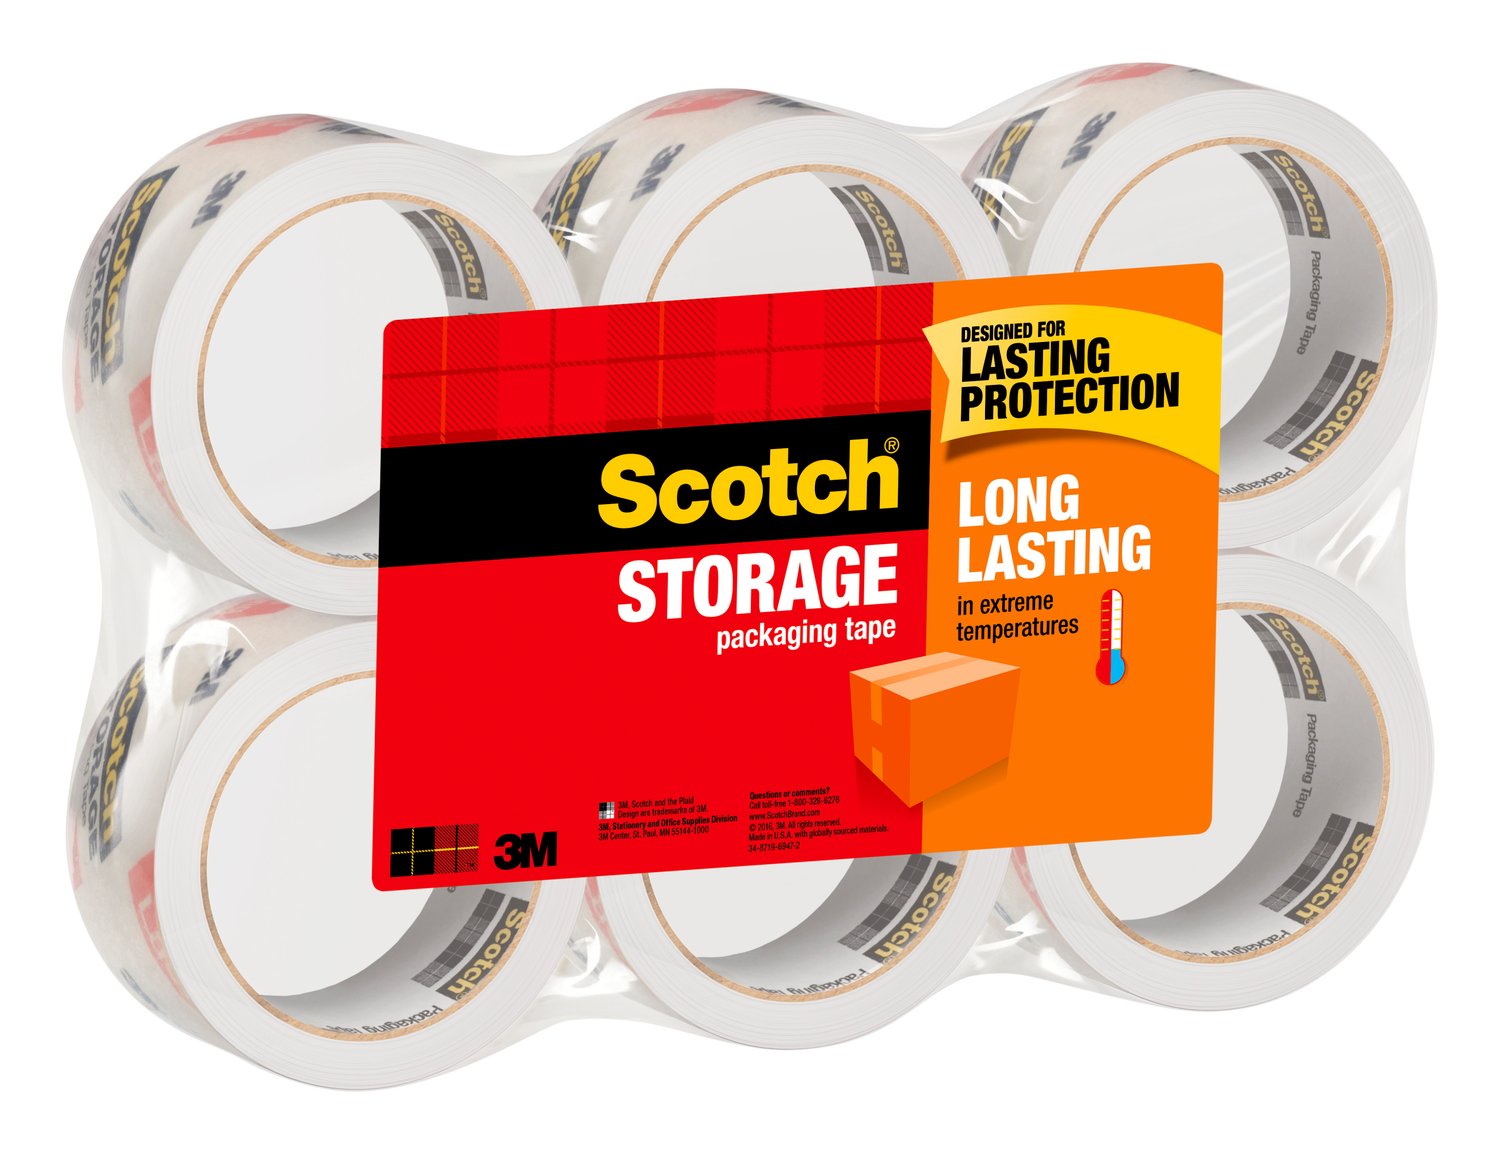 7100116233 - Scotch Long Lasting Storage Packaging Tape 3650-6, 1.88 in x 54.6 yd (48 mm x 50 m), 6 rolls/pack - 6 packs/case